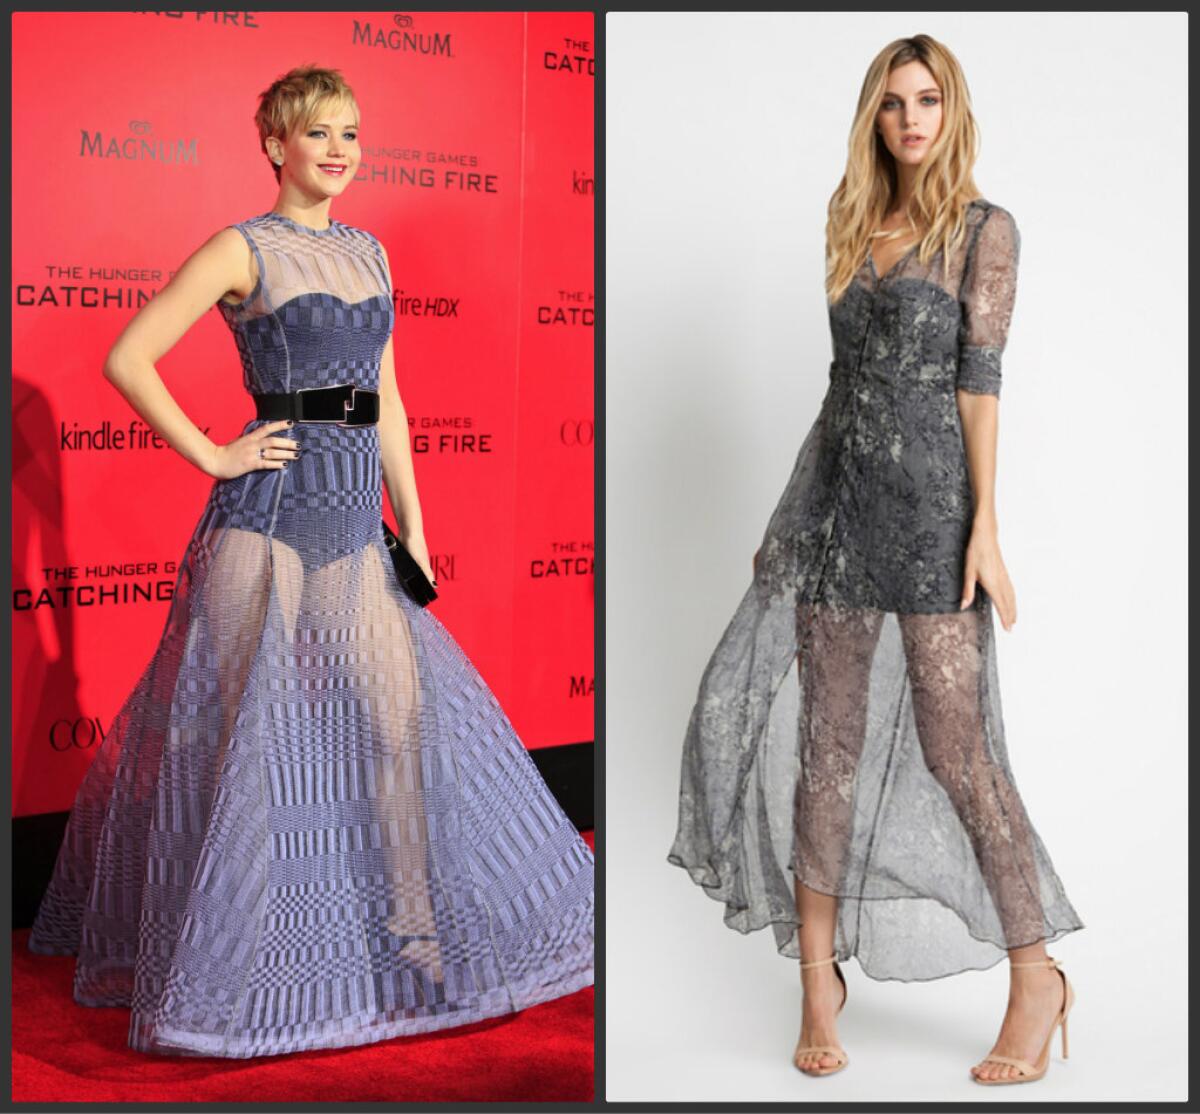 Jennifer Lawrence, left, wears a sheer Dior Couture gown. The Monk dress, right, on Stylesaint.com provides a similar look.